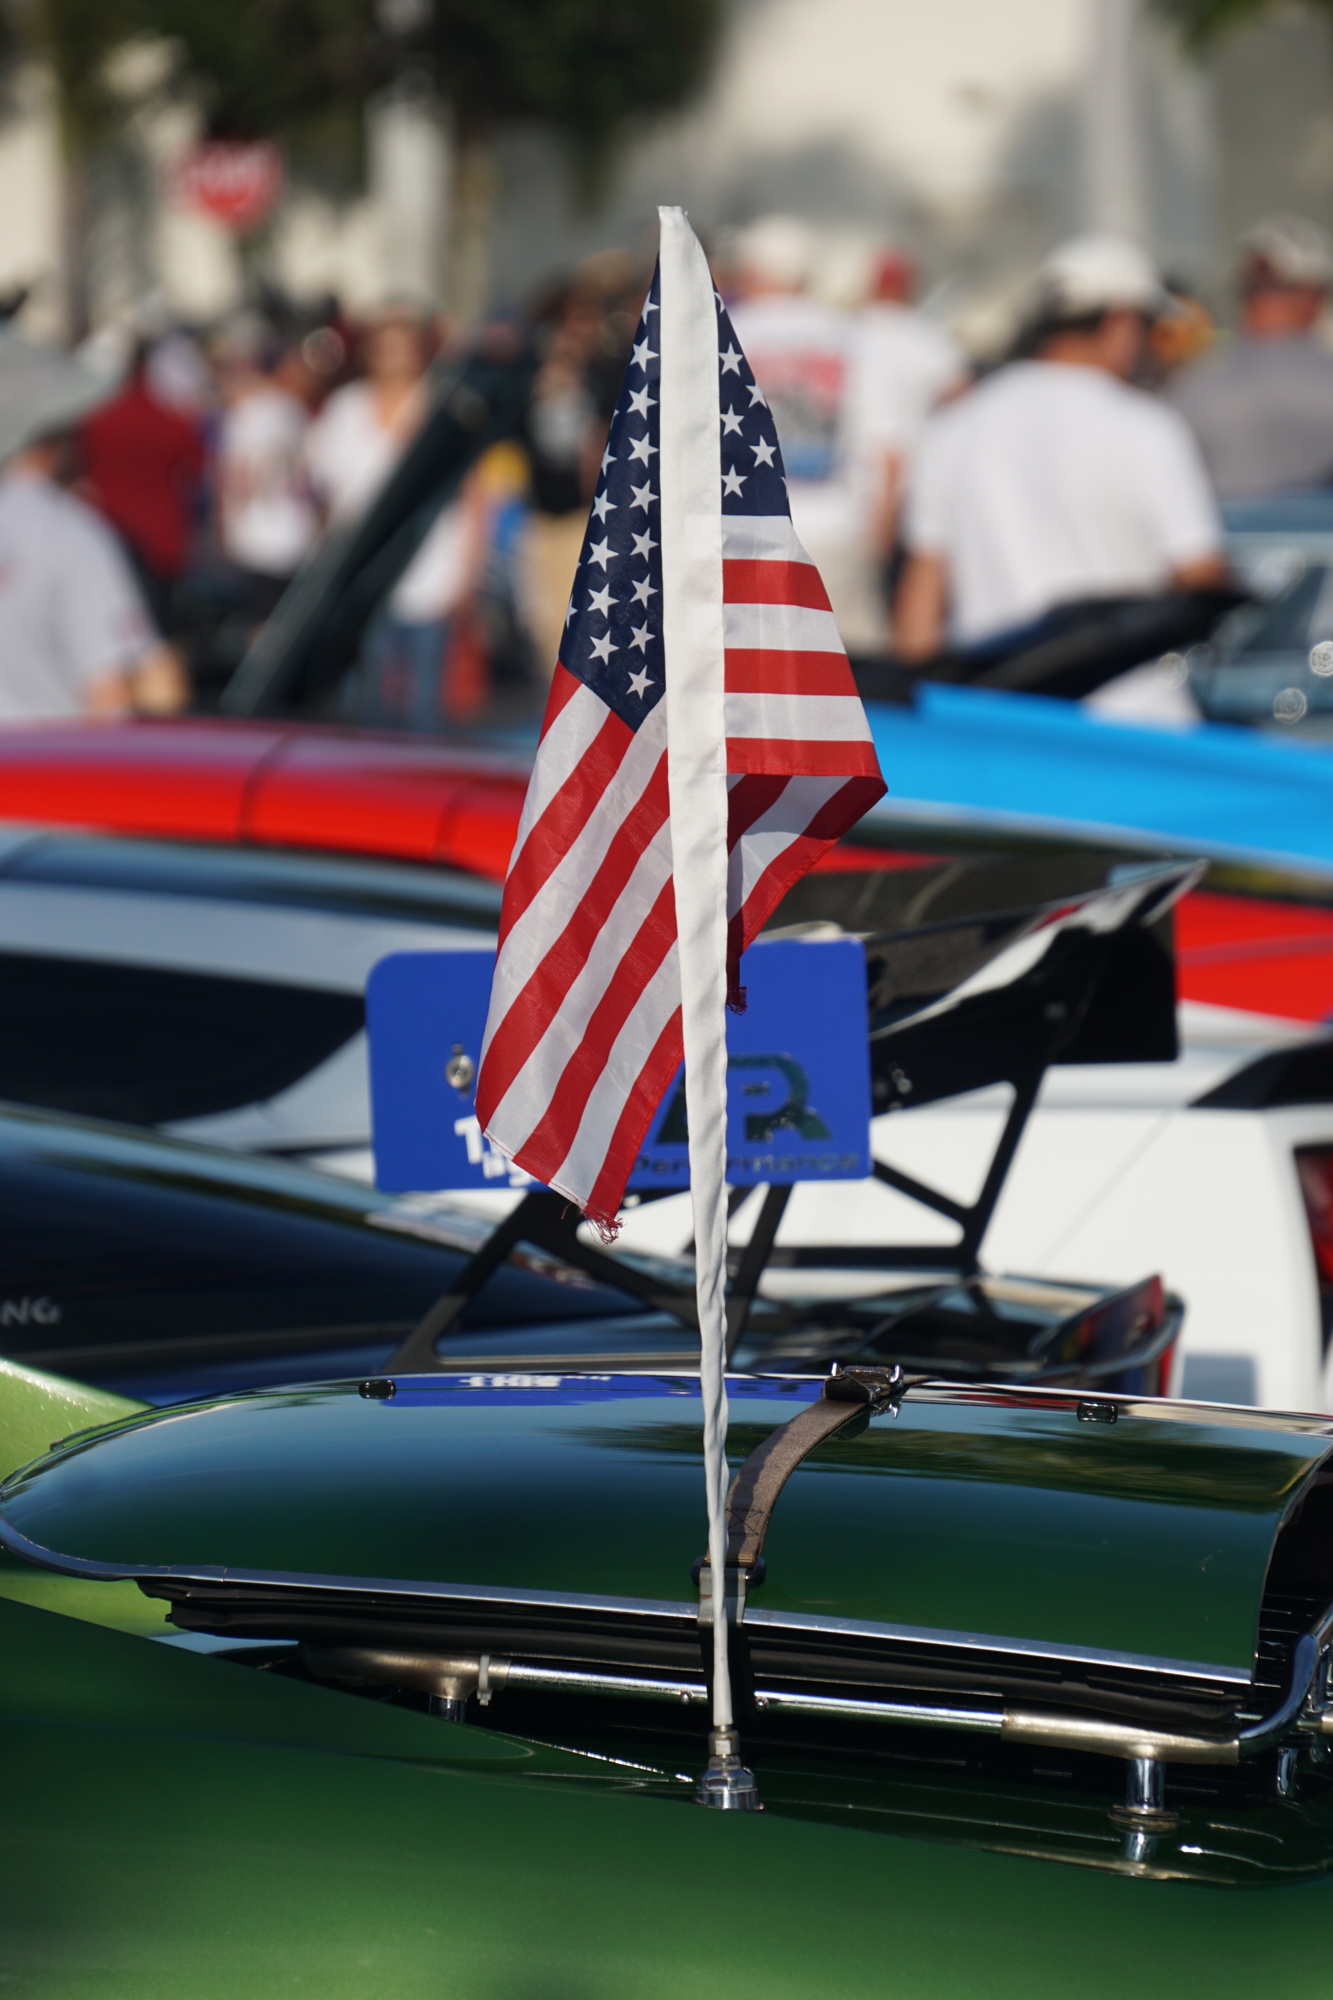 An American flag flies from the antenna of a sports car in a recent Cars and Coffee event.